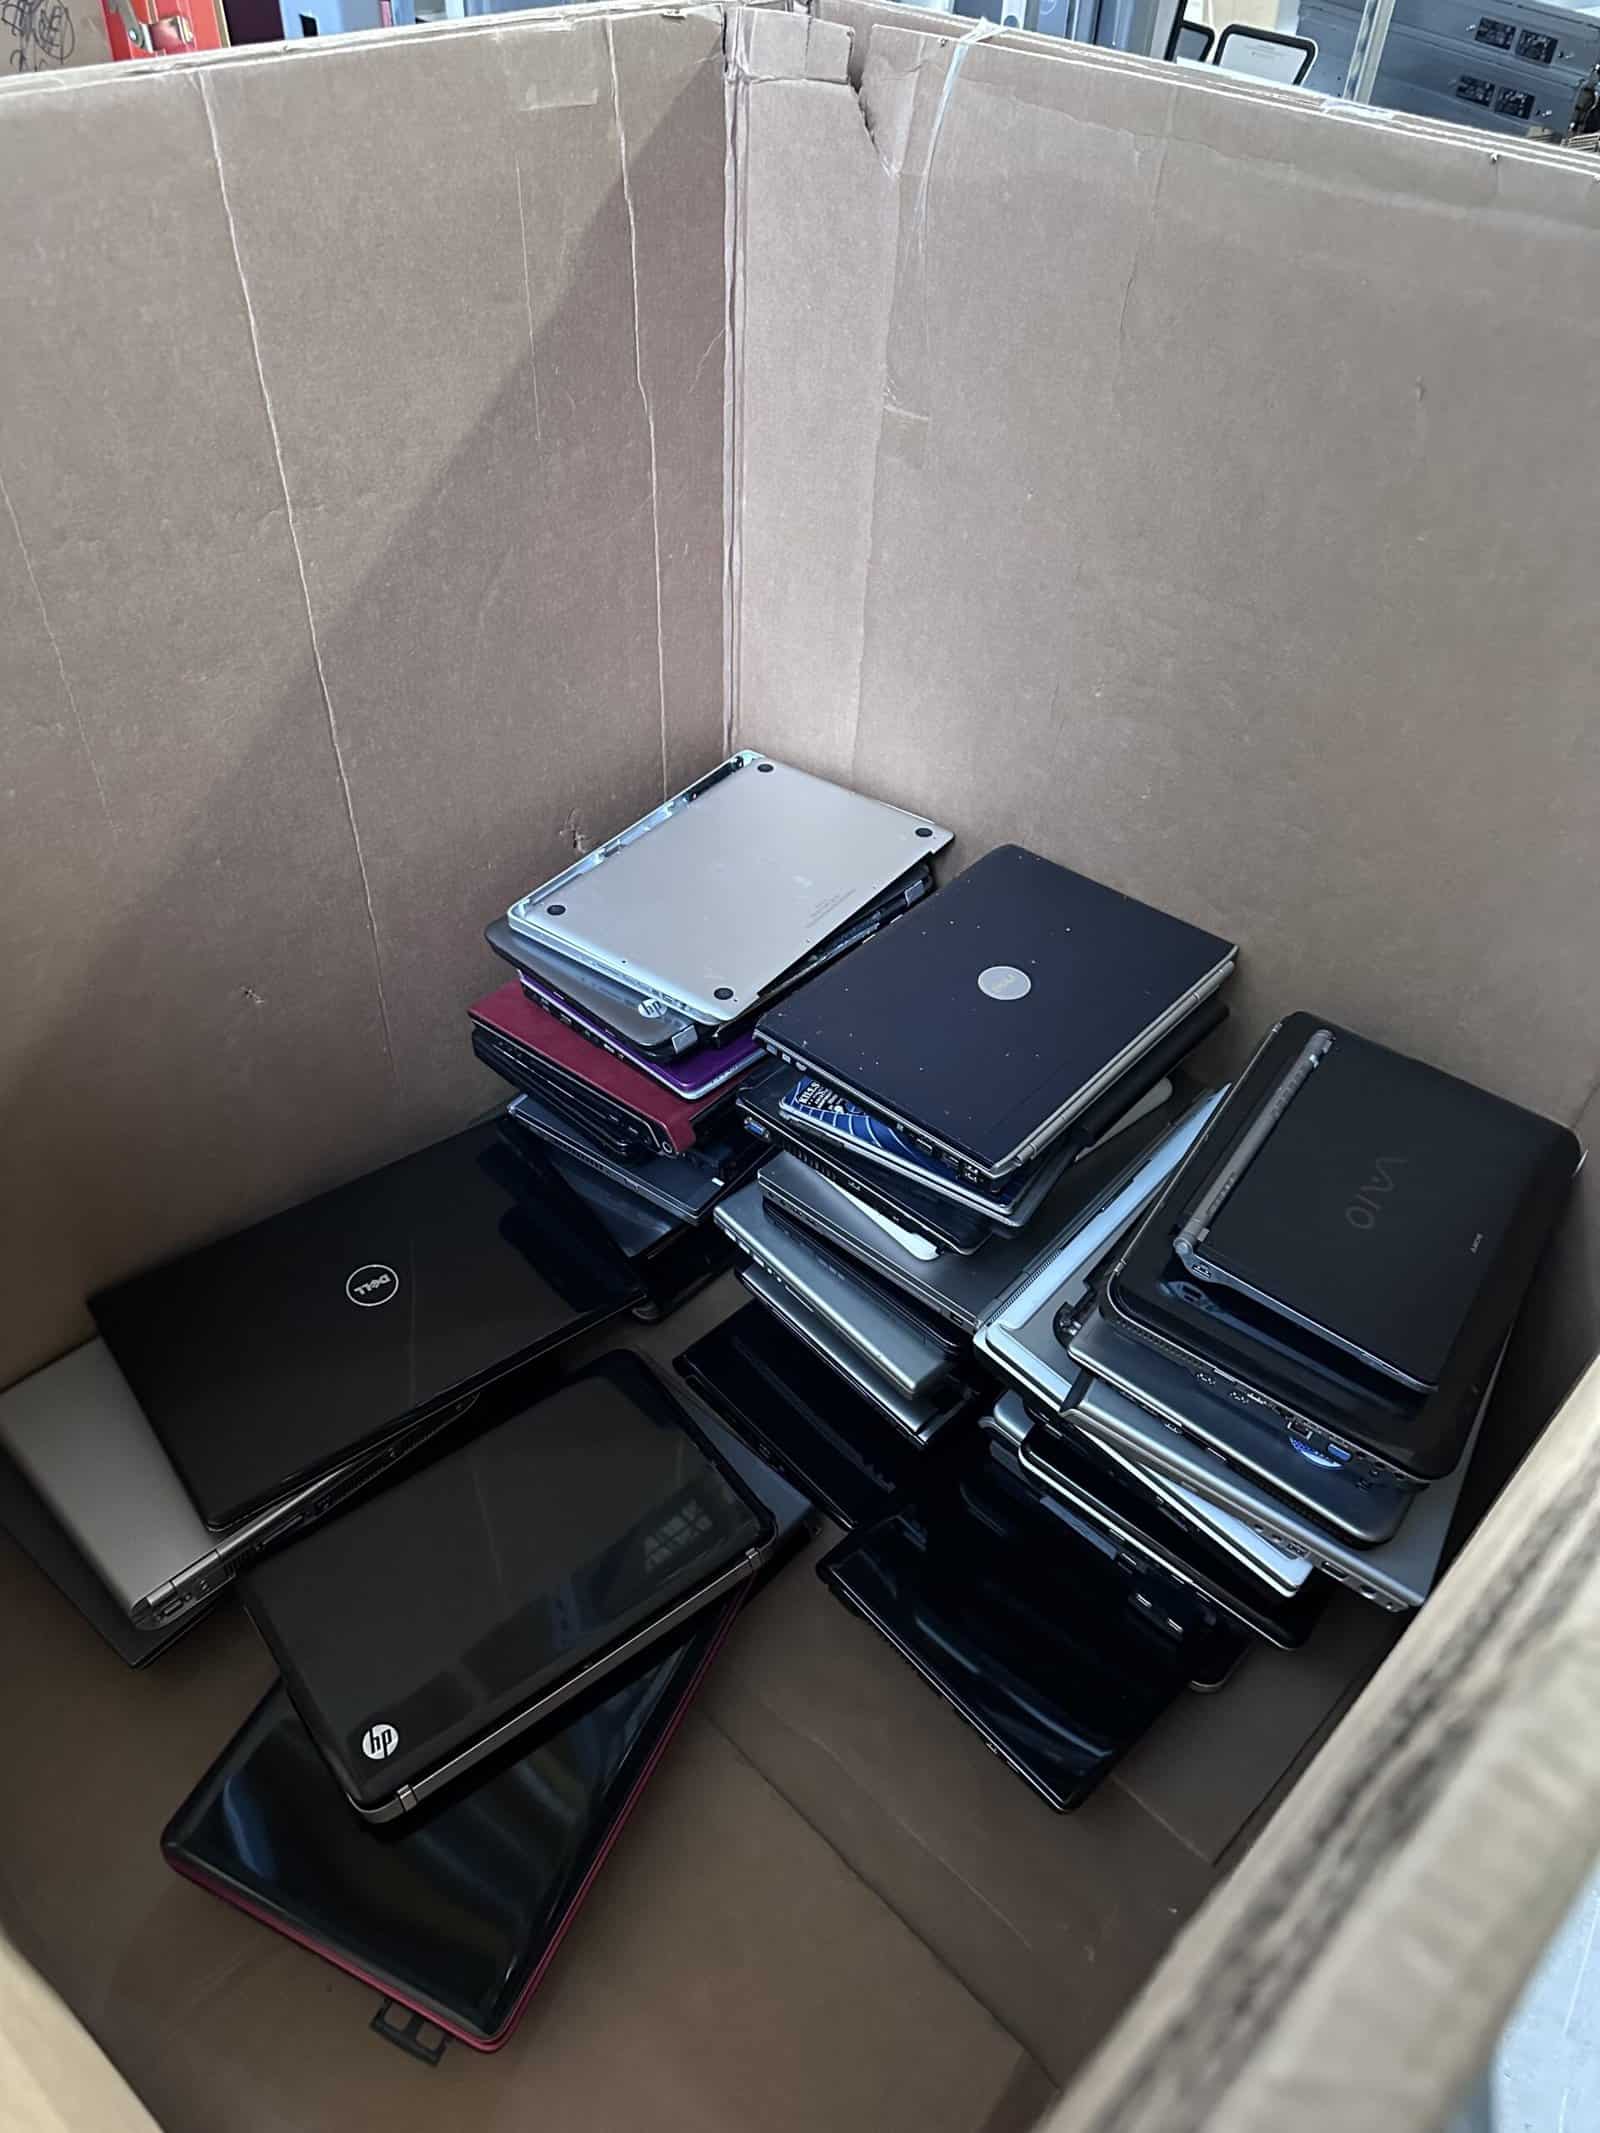 Recycling Old Laptops: Easy as 1, 2, 3!